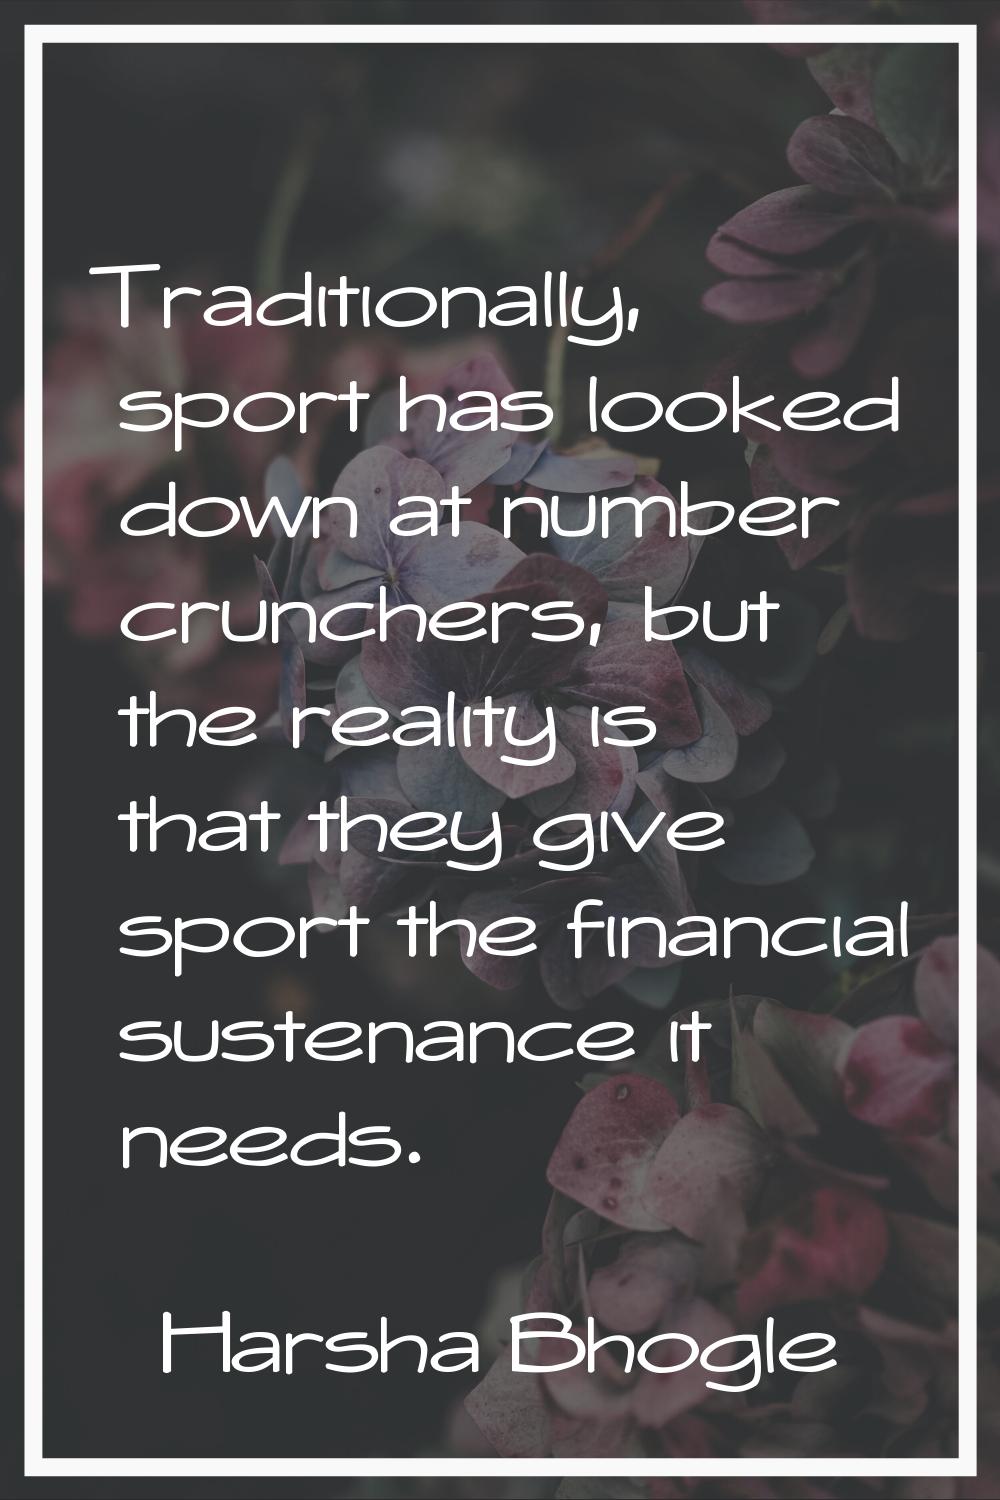 Traditionally, sport has looked down at number crunchers, but the reality is that they give sport t